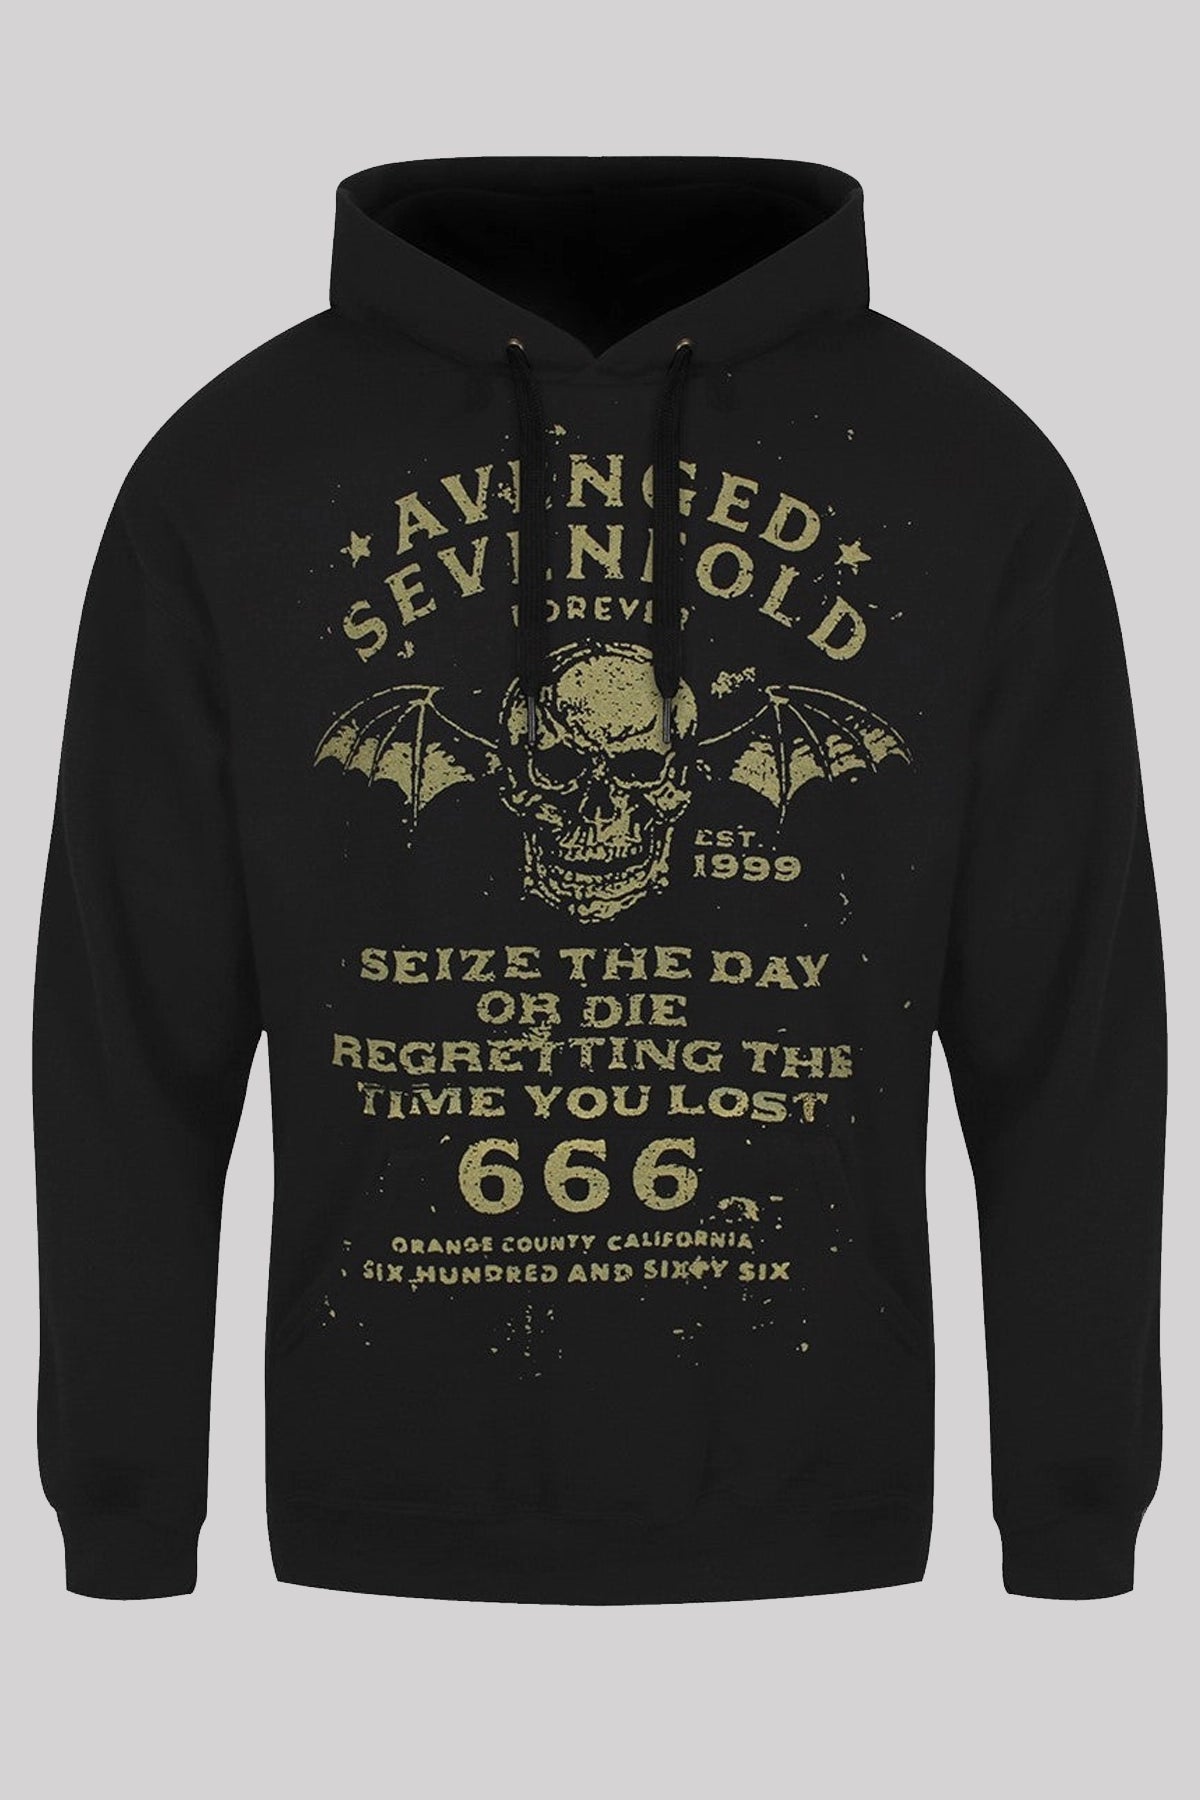 Avenged Sevenfold Seize the Day Unisex Hoodie